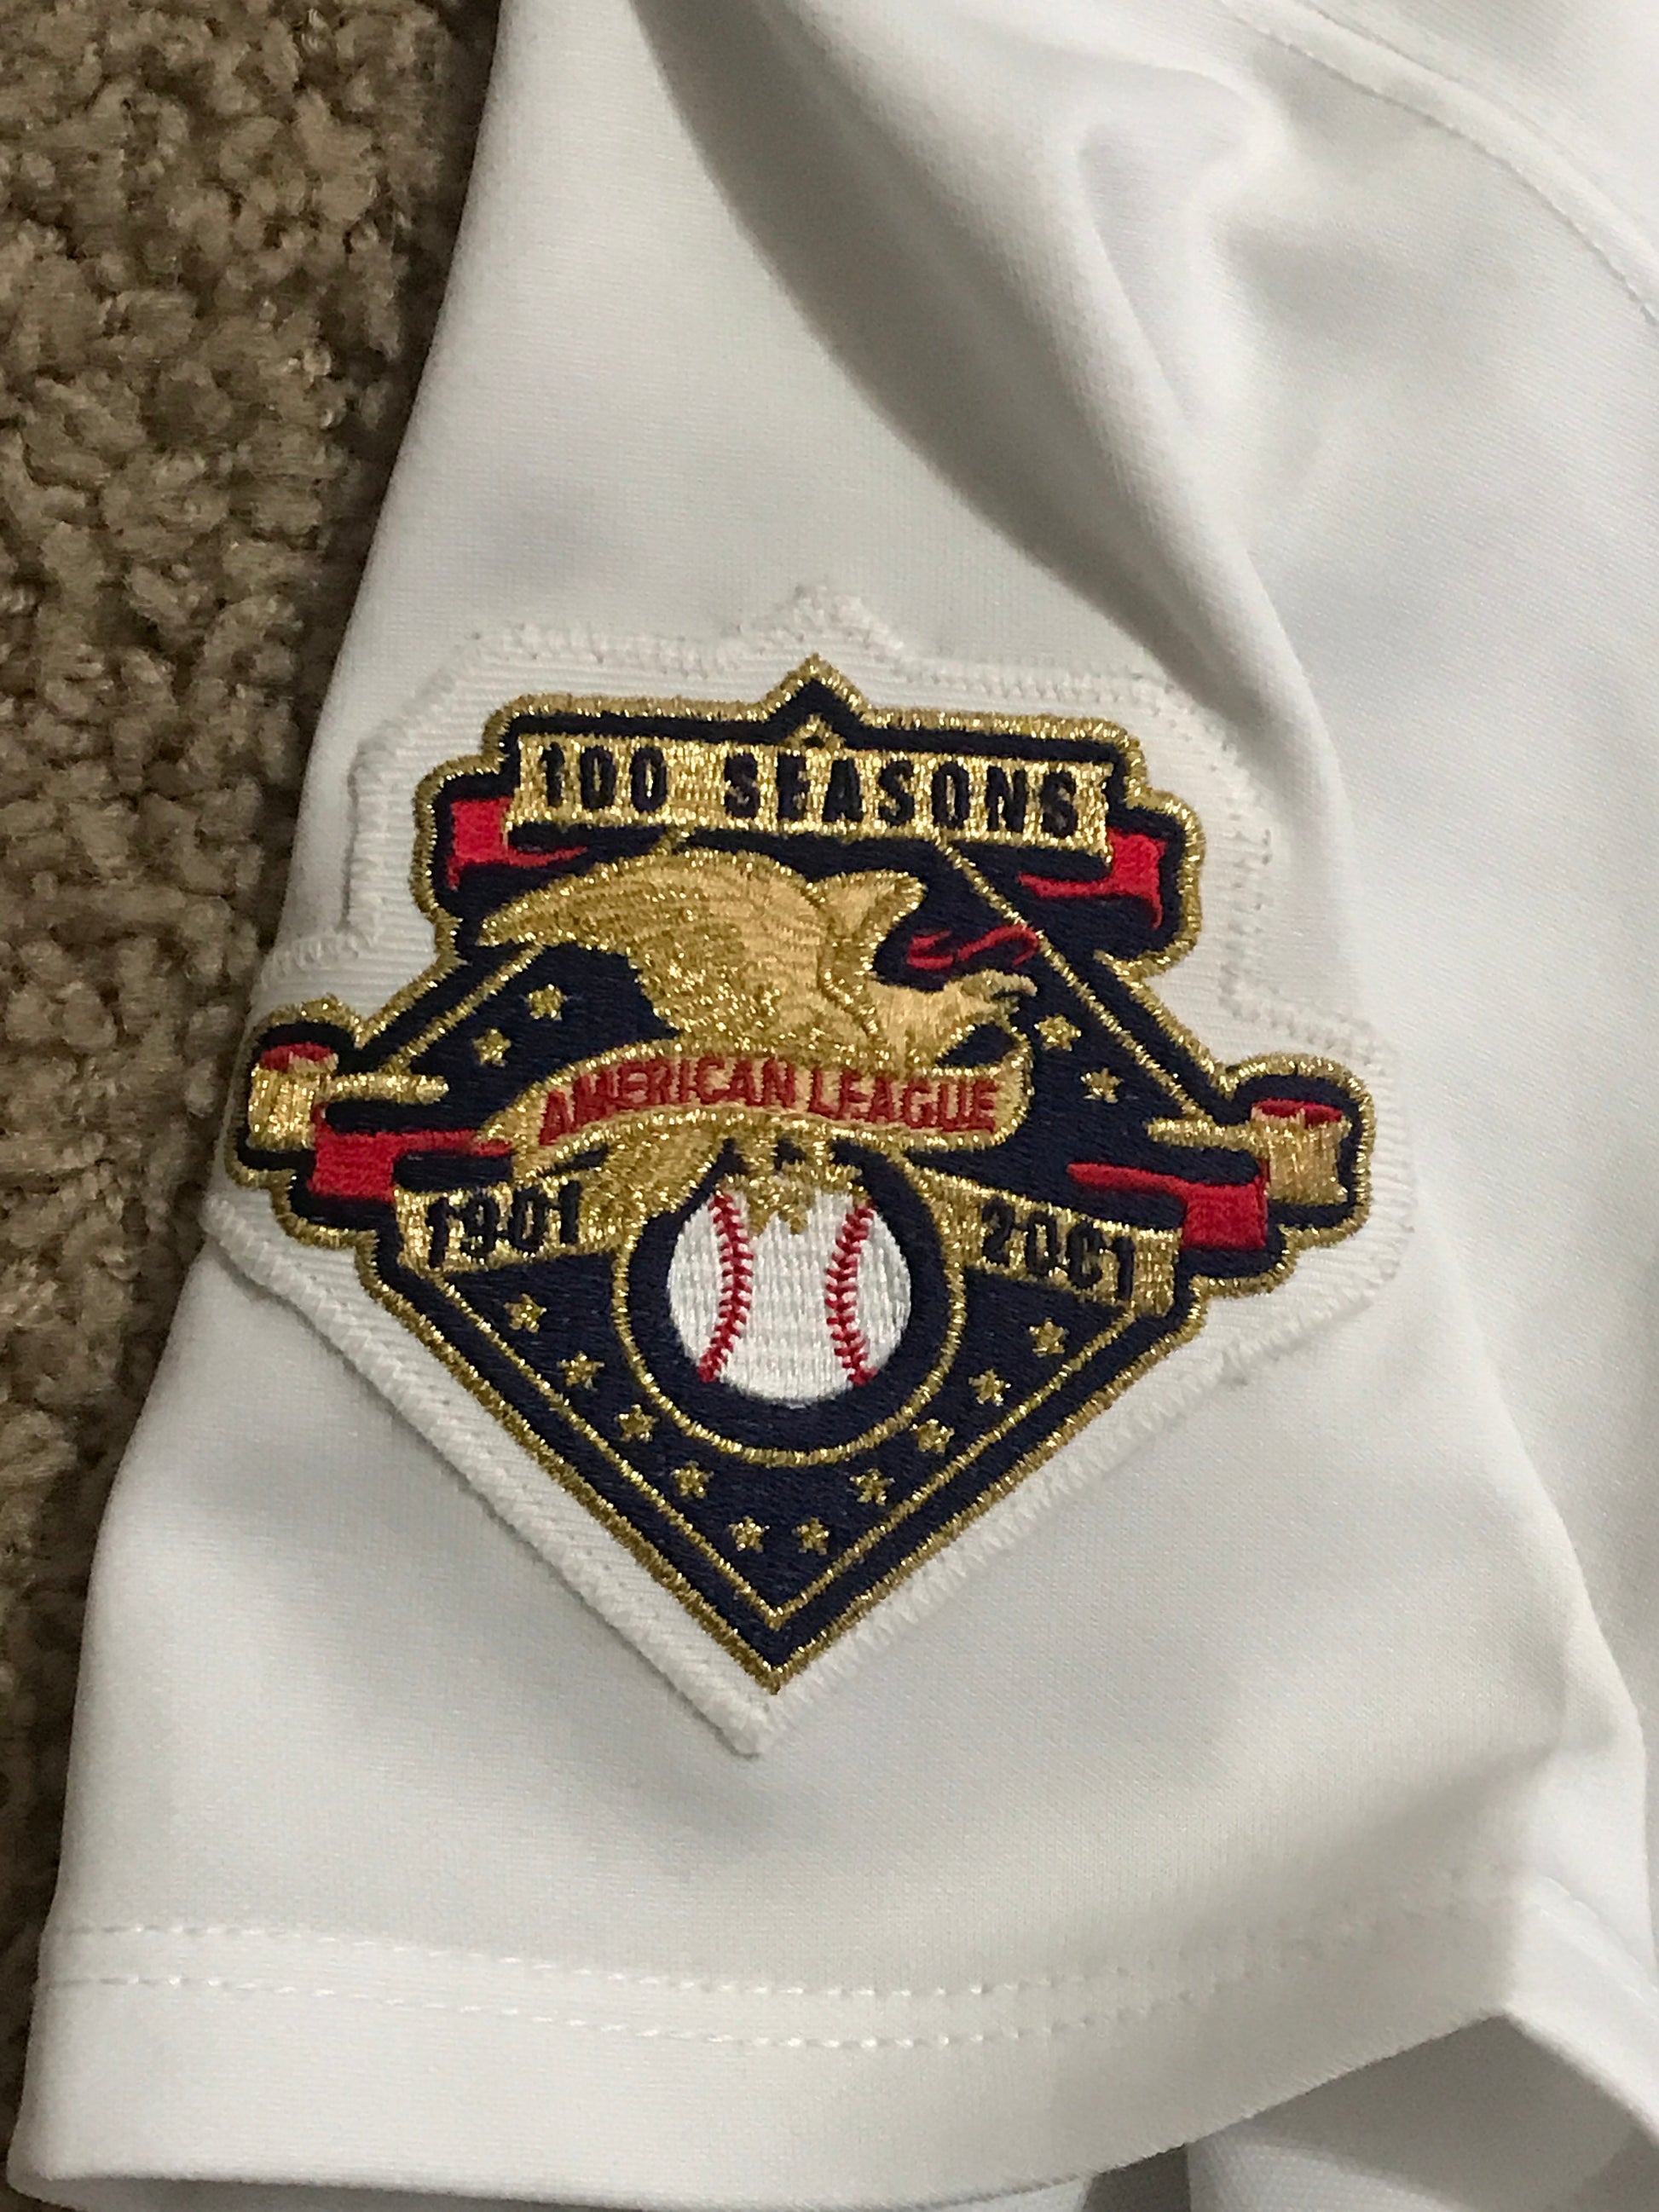 2001 AMERICAN LEAGUE 100TH YEAR Charter Member OFFICIAL MLB PATCH